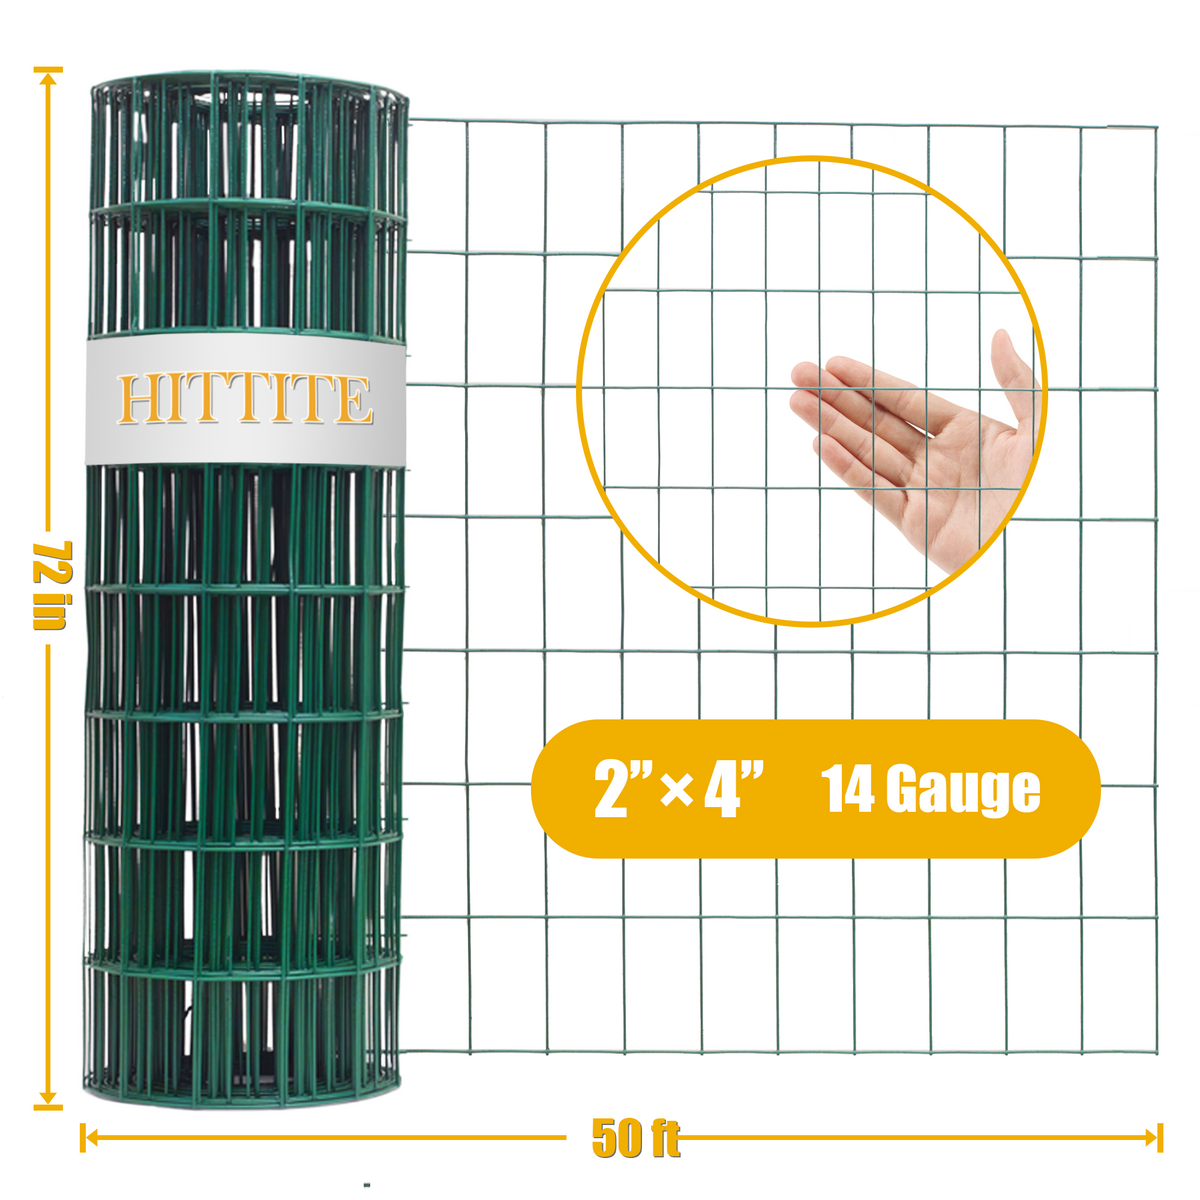 HITTITE Green PVC Coated Welded Wire Fencing, 72in H x 50ft L, 2 inch x 4 inch 14 GA Welded Wire Fence Rolls, Black Metal Garden Fence Wire Roll Garden Border Fencing for Yard Vegetable Plant Protection